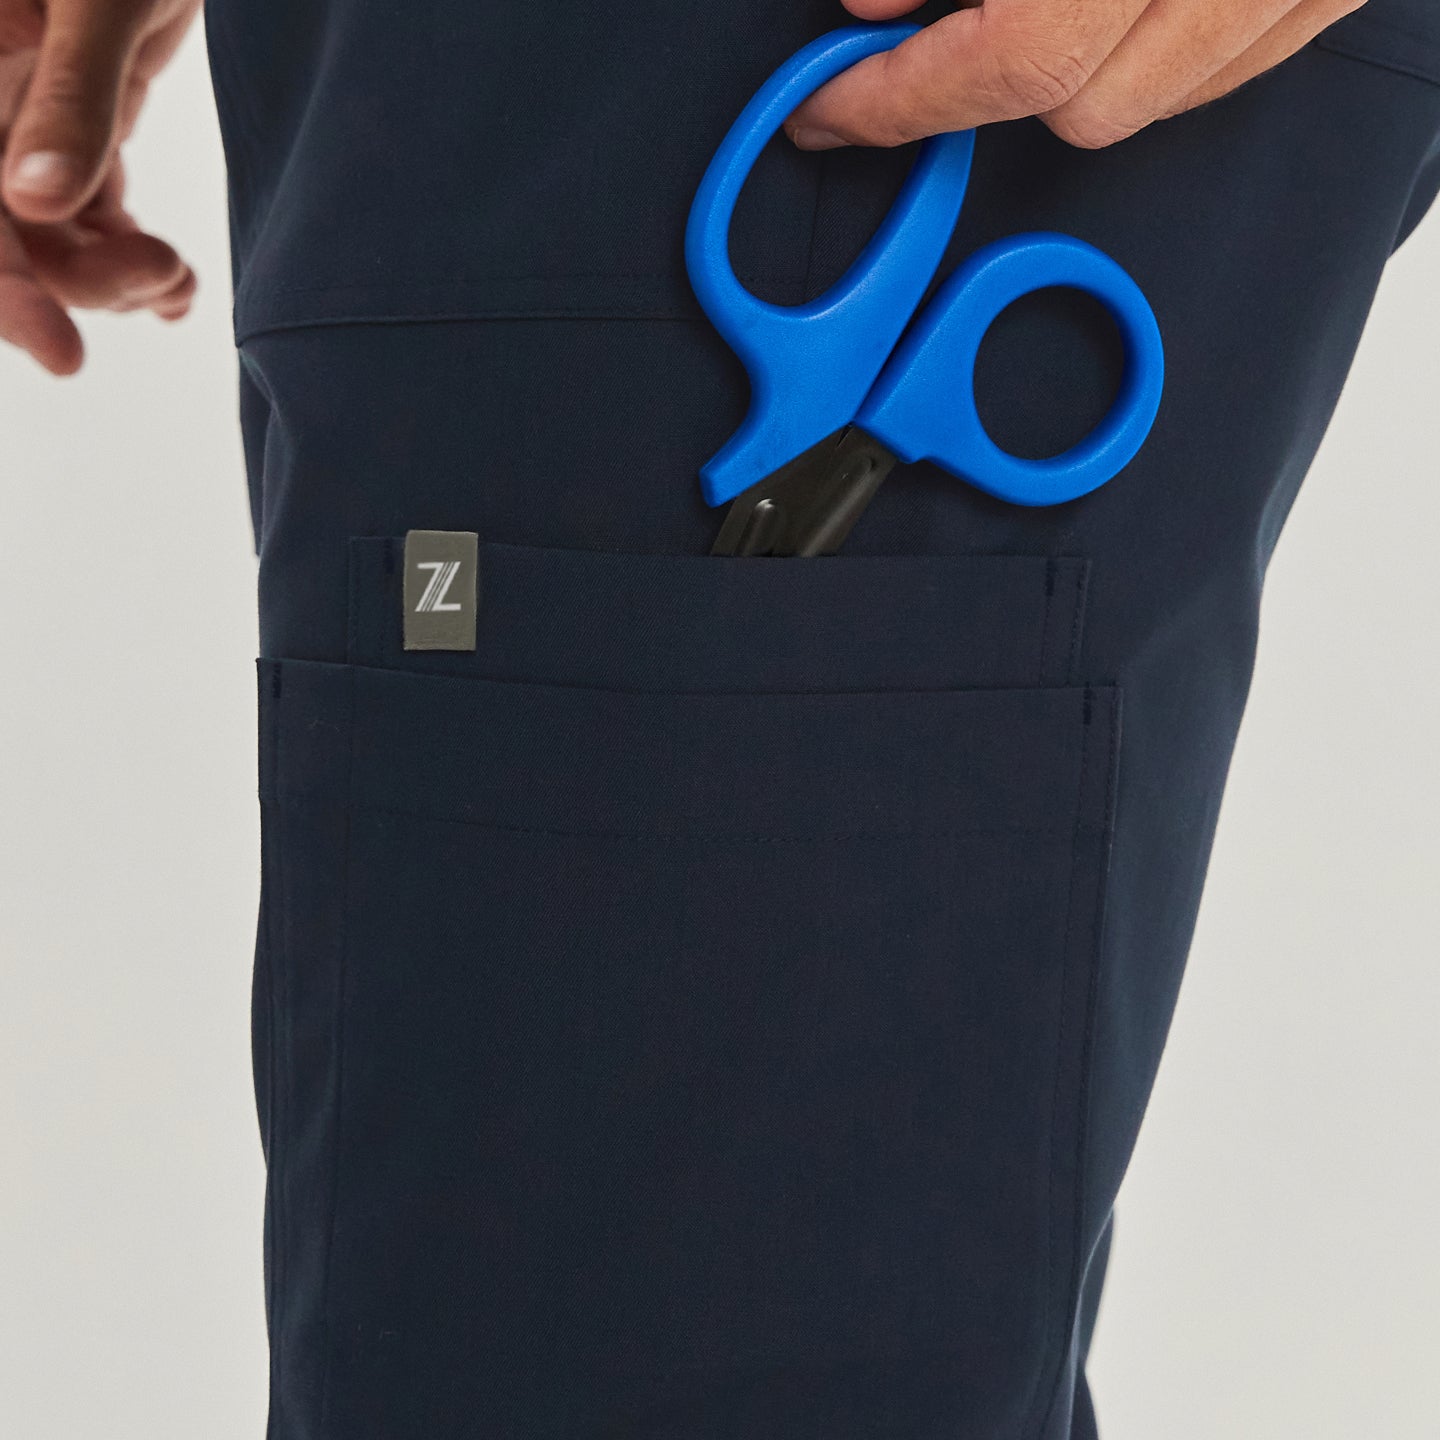 Jogger-style scrub pants with a front pocket holding blue medical scissors. The pocket features a small square logo tag,Navy